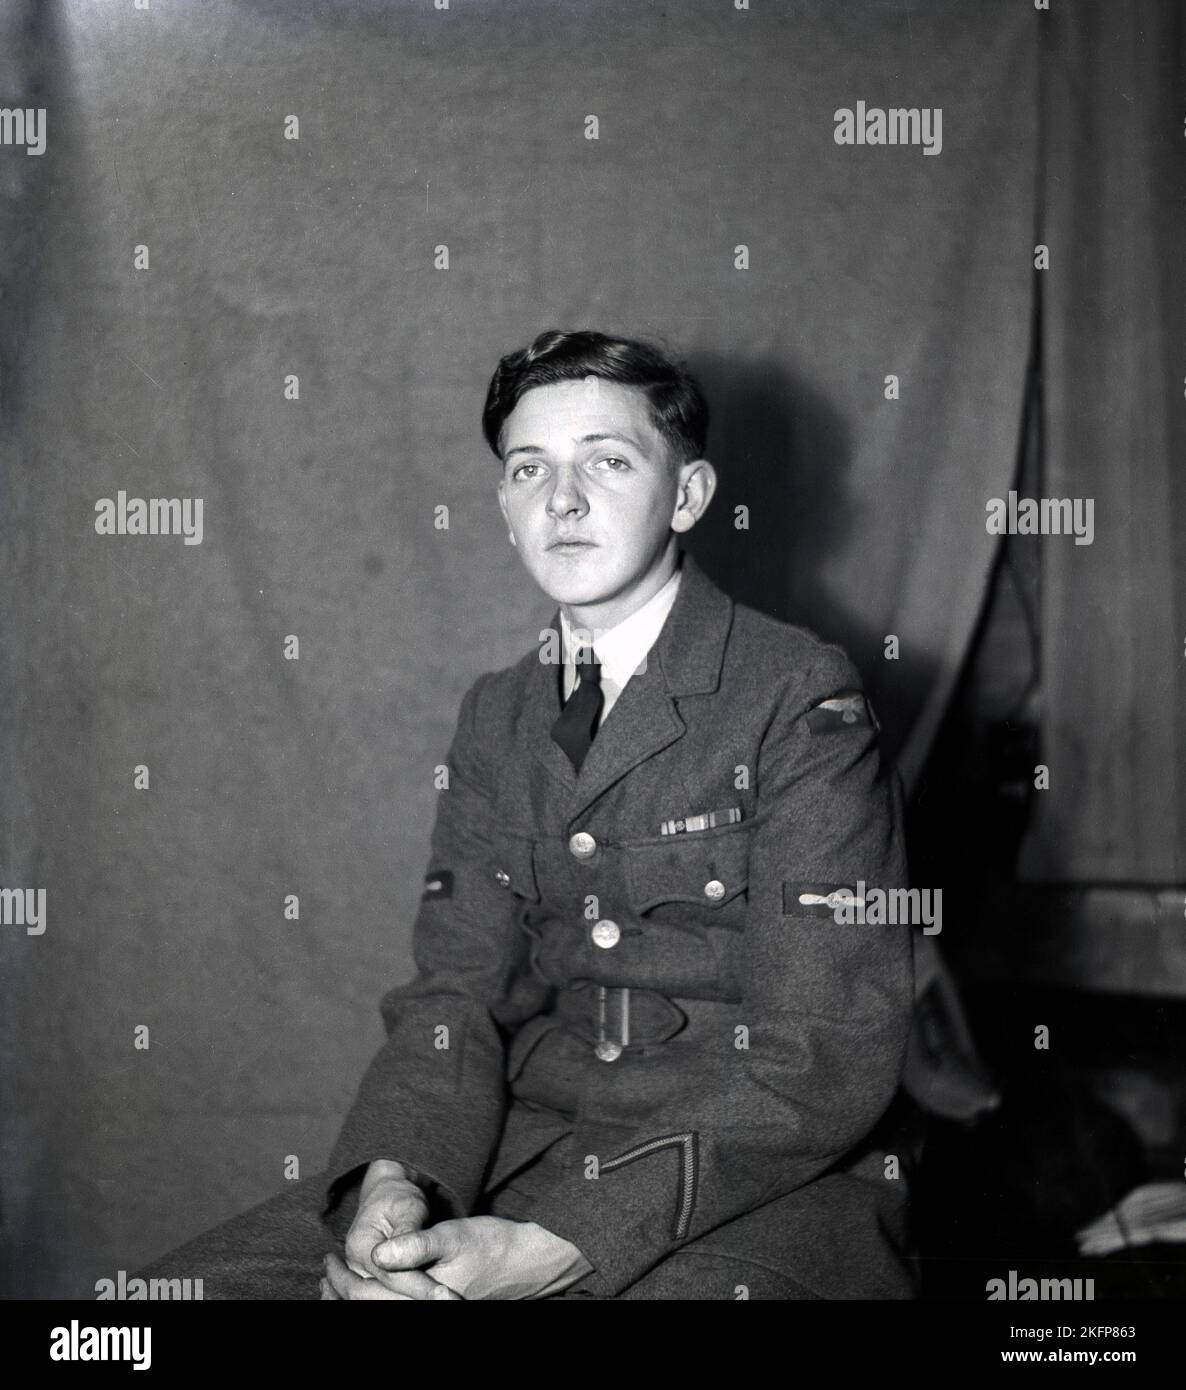 circa 1949, historical, at RAF Ternhill, Market Drayton, Shropshire, England, UK, a young man, a Junior NCO sitting inside for his photo. His service dress or uniform is made from Barathea, a traditional worsted wool fabric, smoother than an airman's heavy and thick wool uniform.  On the lower left arm of his tunic, a points-up chevron insignia, which was an RAF Good Conduct Stripe, in the middle of the tunic, just above the elbow, a propeller emblem, denoting a Leading Aircraftman and on the upper arm, an RAF Shoulder Flash. Stock Photo